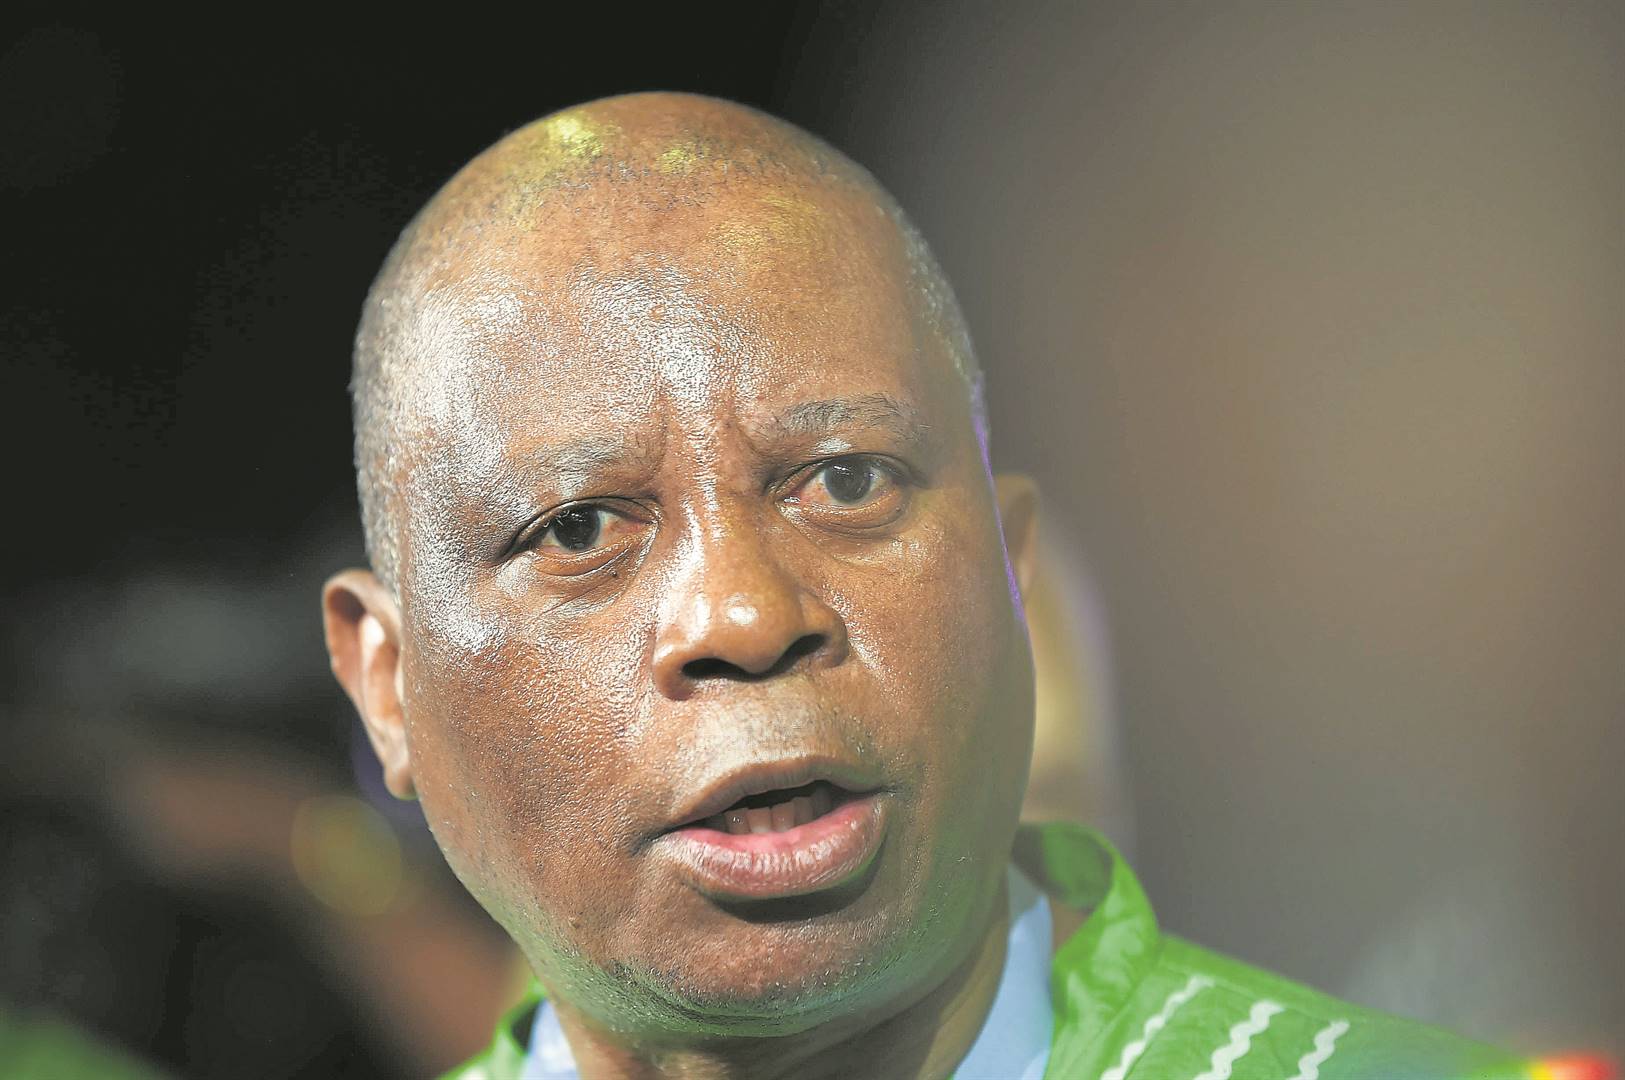 Herman Mashaba will lead a picket outside the Department of Mineral Resources and Energy Minister Gwede Mantashe’s Head Quarters in Sunnyside, Tshwane on Tuesday. 